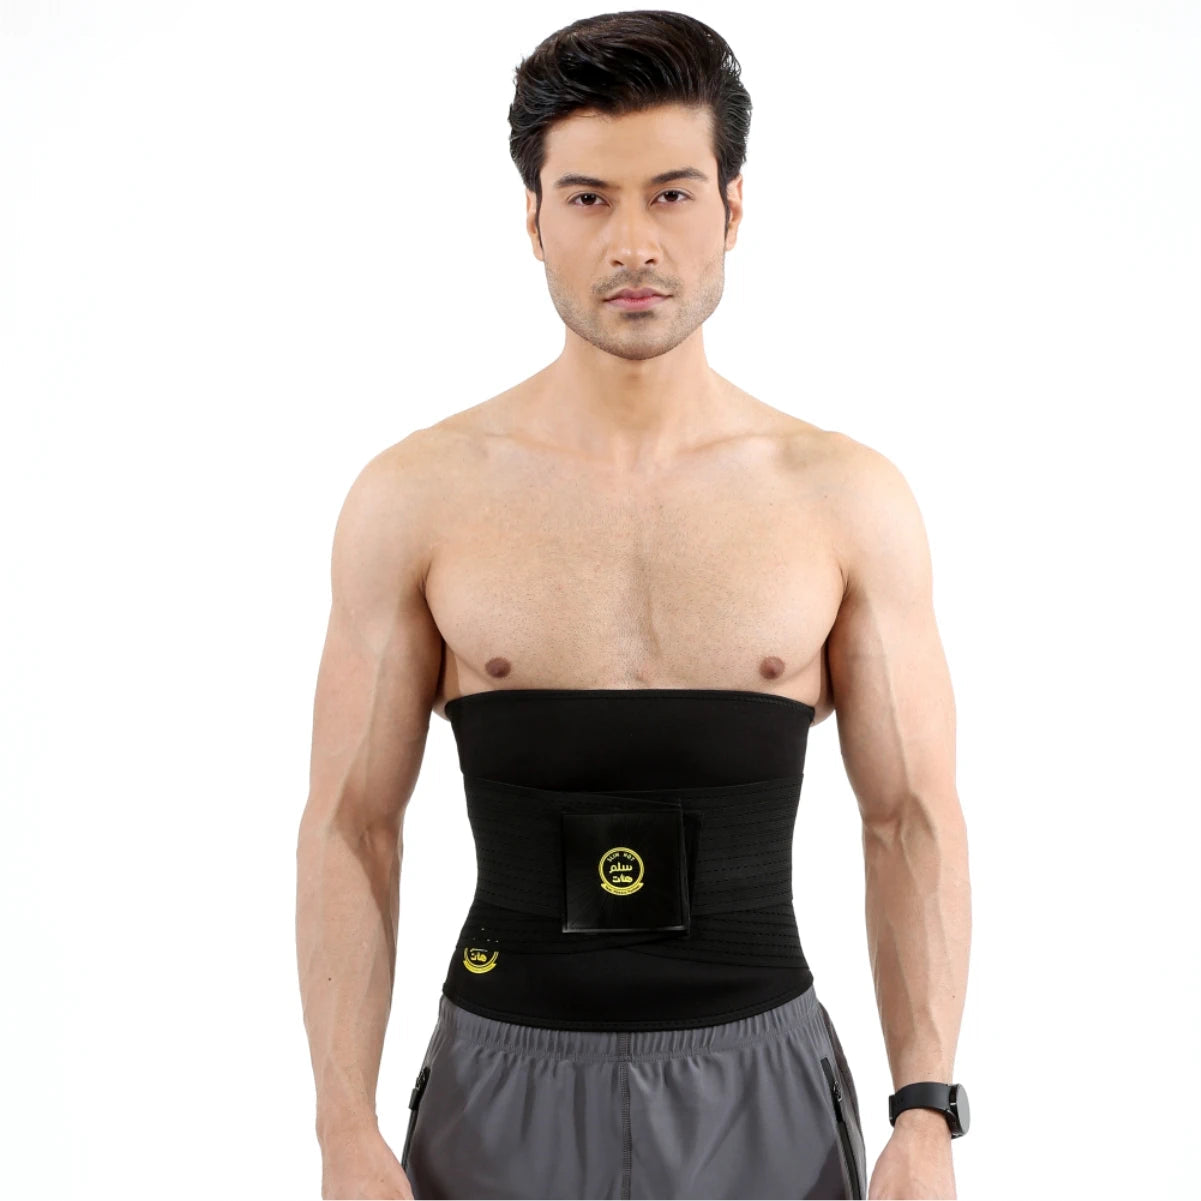 Achieve Your Fitness Goals with Our Slim Hot Belt and Waist Trainer